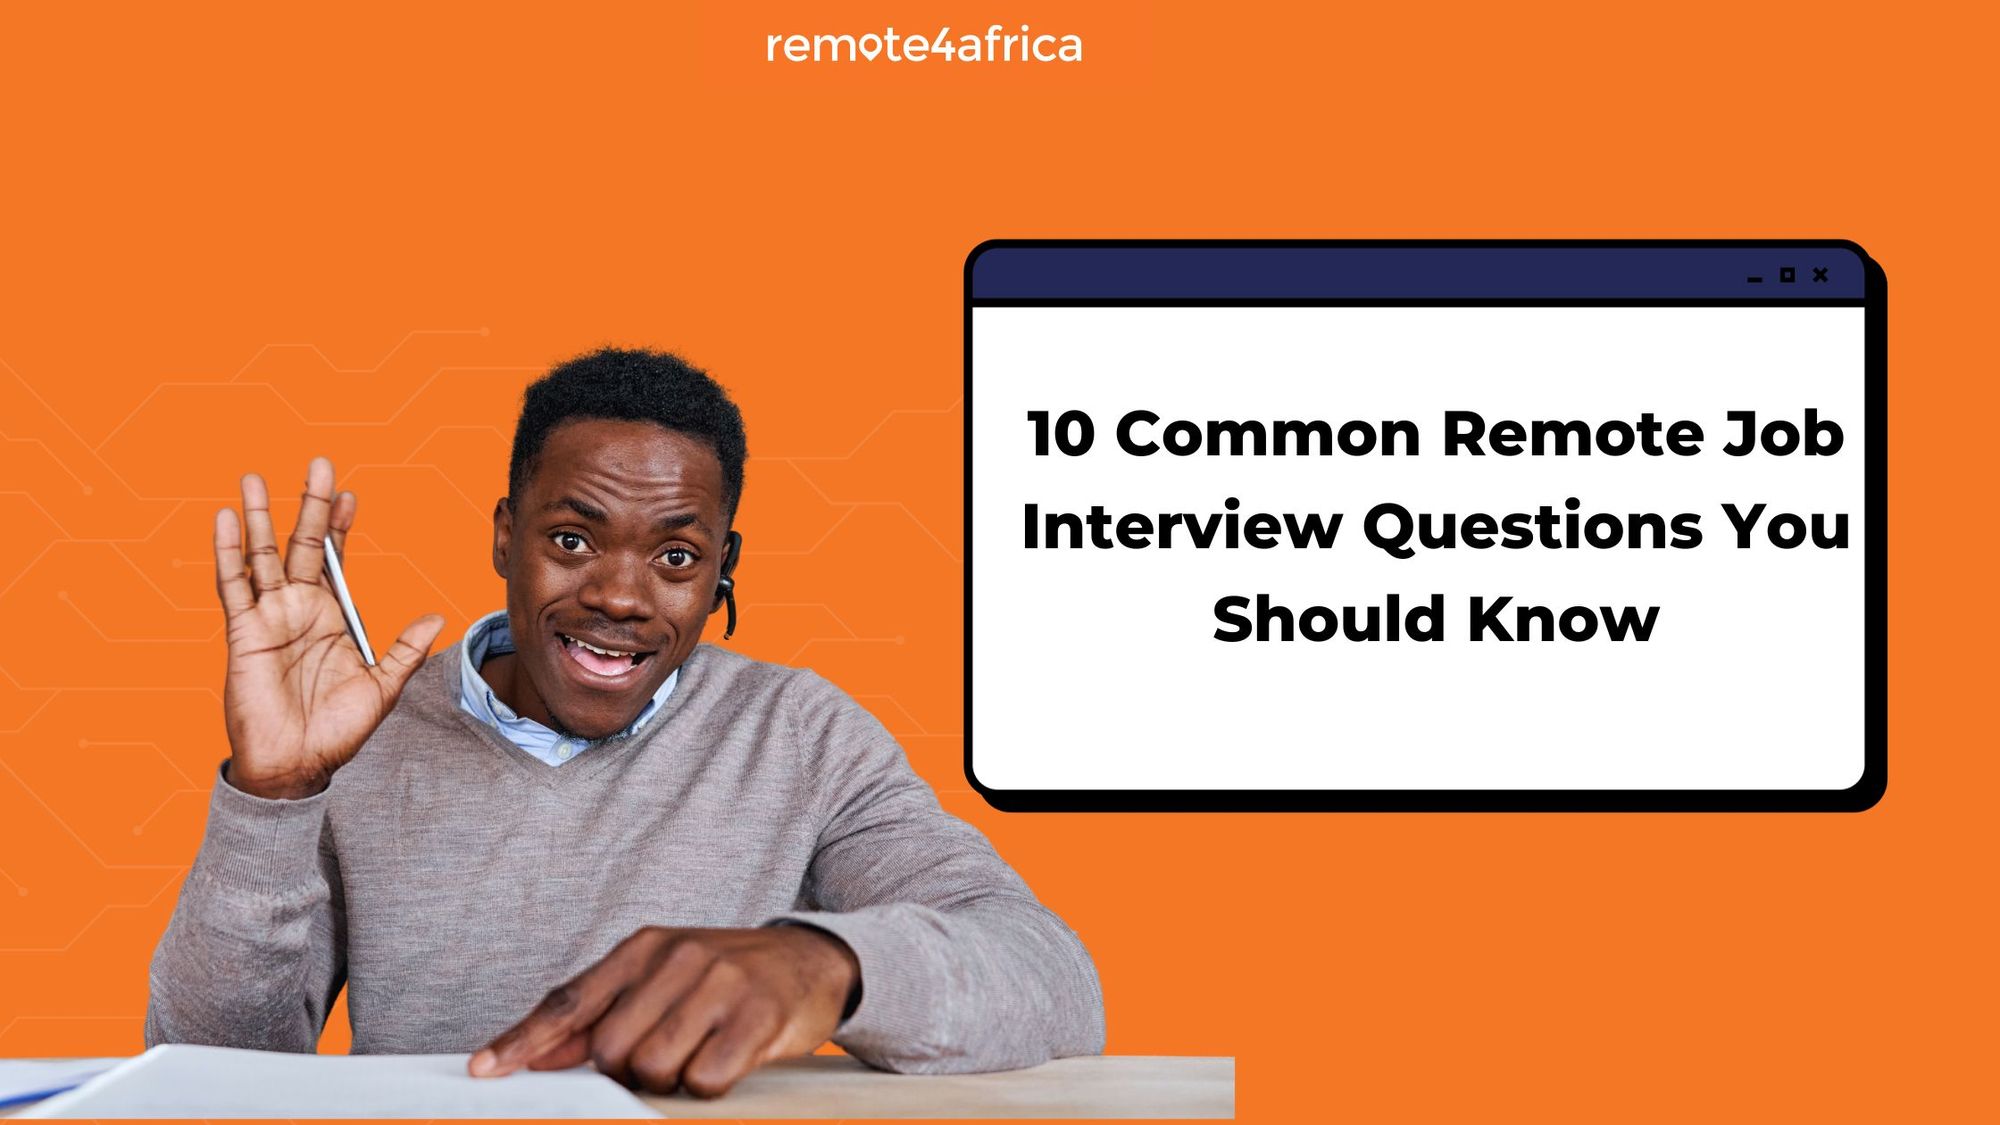 10 Common Remote Job Interview Questions You Should Know